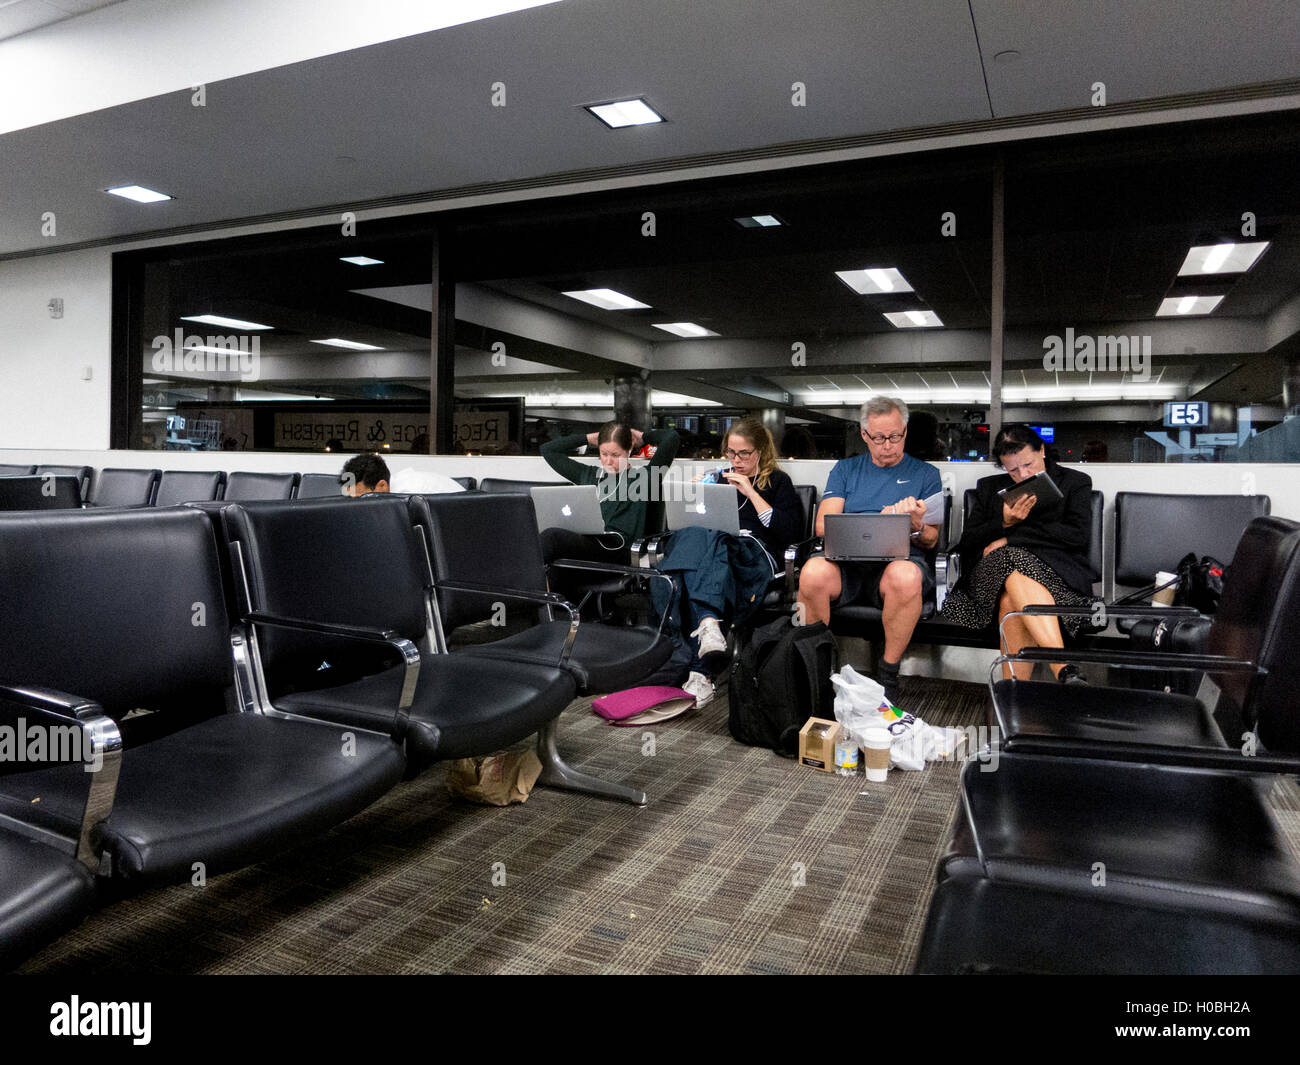 Passengers at Fort Lauderdale Hollywood airport busy with laptops while waiting. Stock Photo